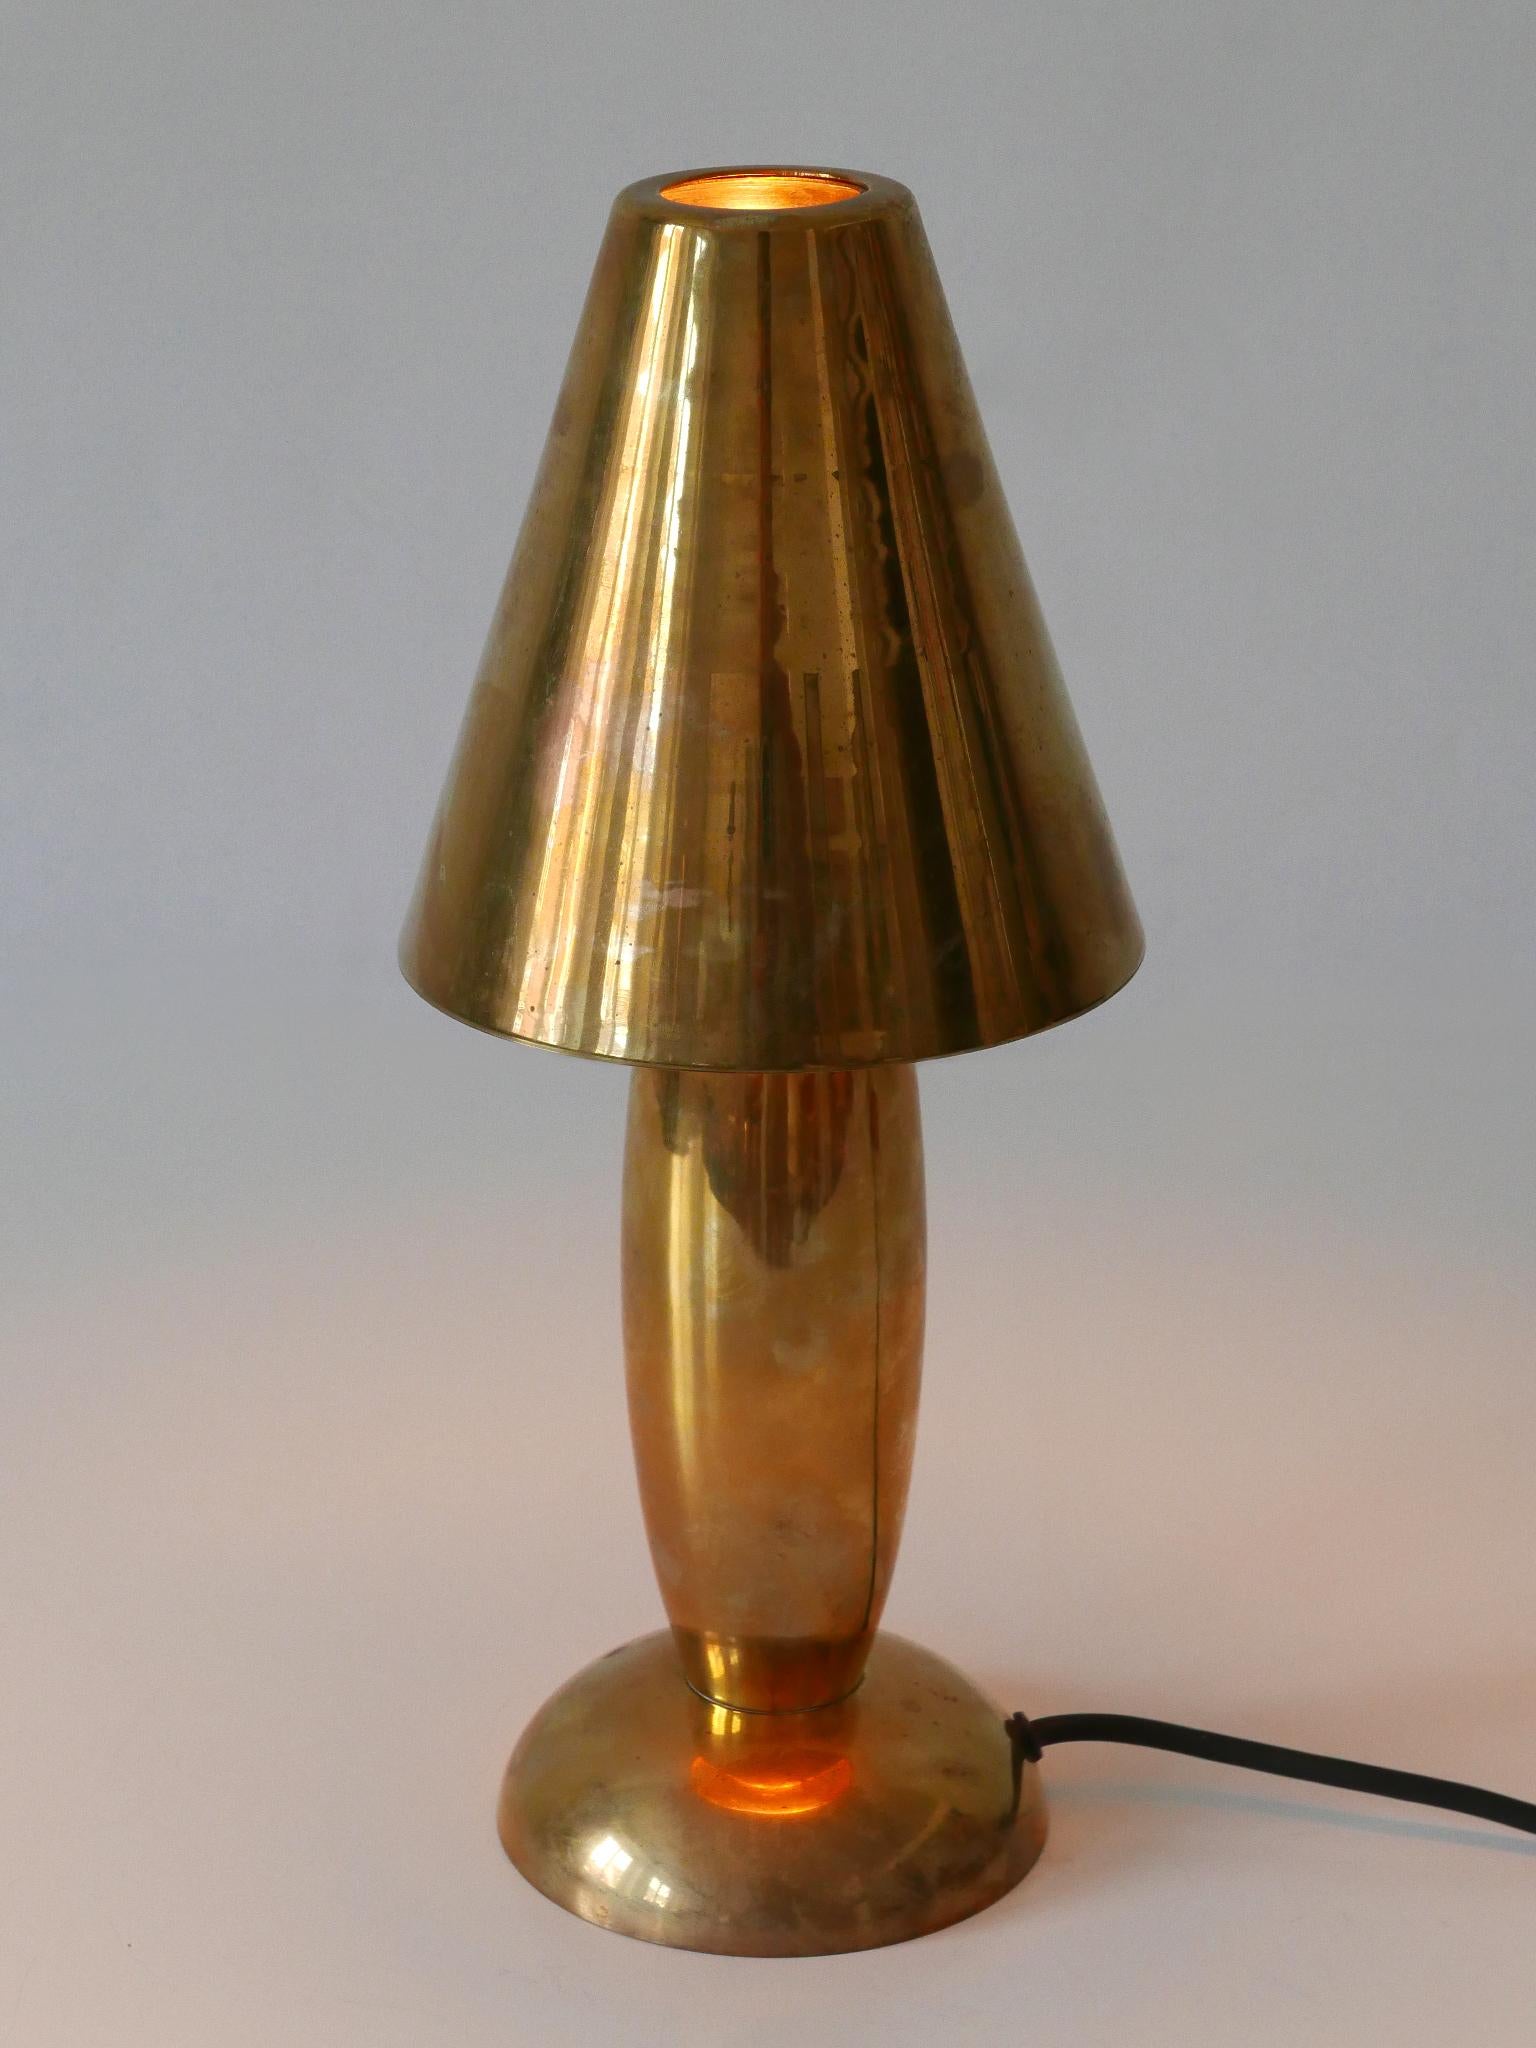 Rare & Lovely Mid-Century Modern Brass Side Table Lamp by Lambert Germany 1970s For Sale 2